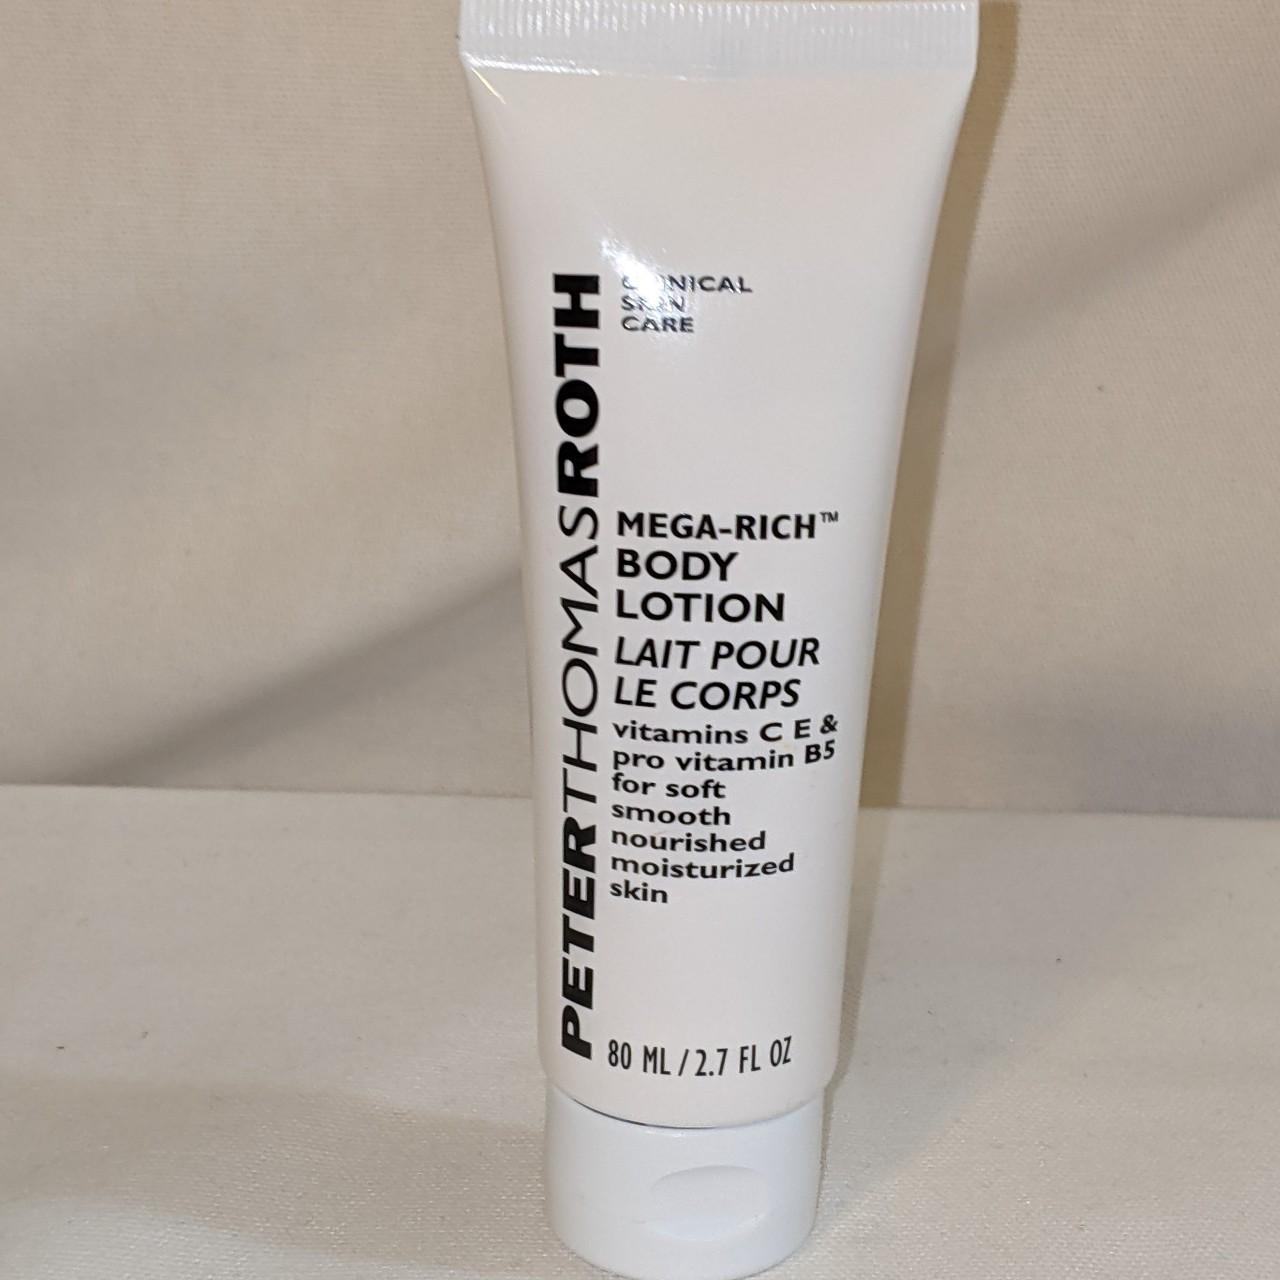 Product Image 1 - Peter Thomas Roth Body Lotion

Sealed